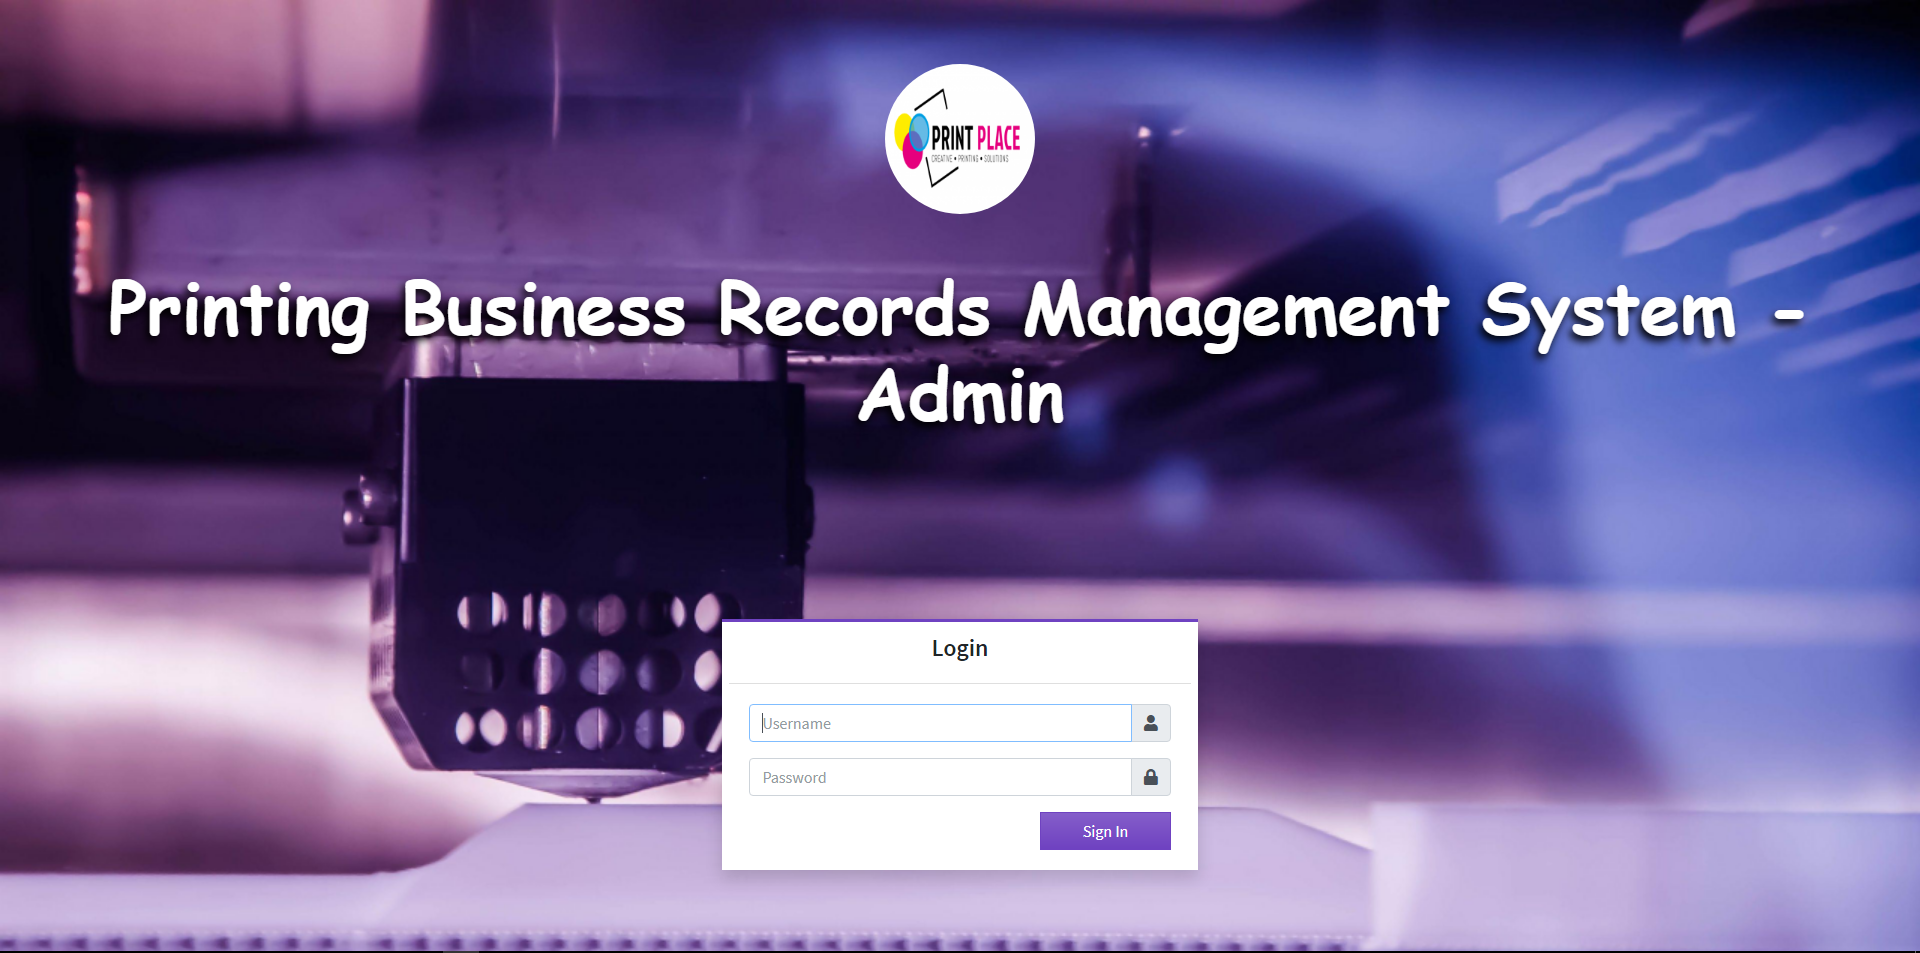 Printing Business Records Management System